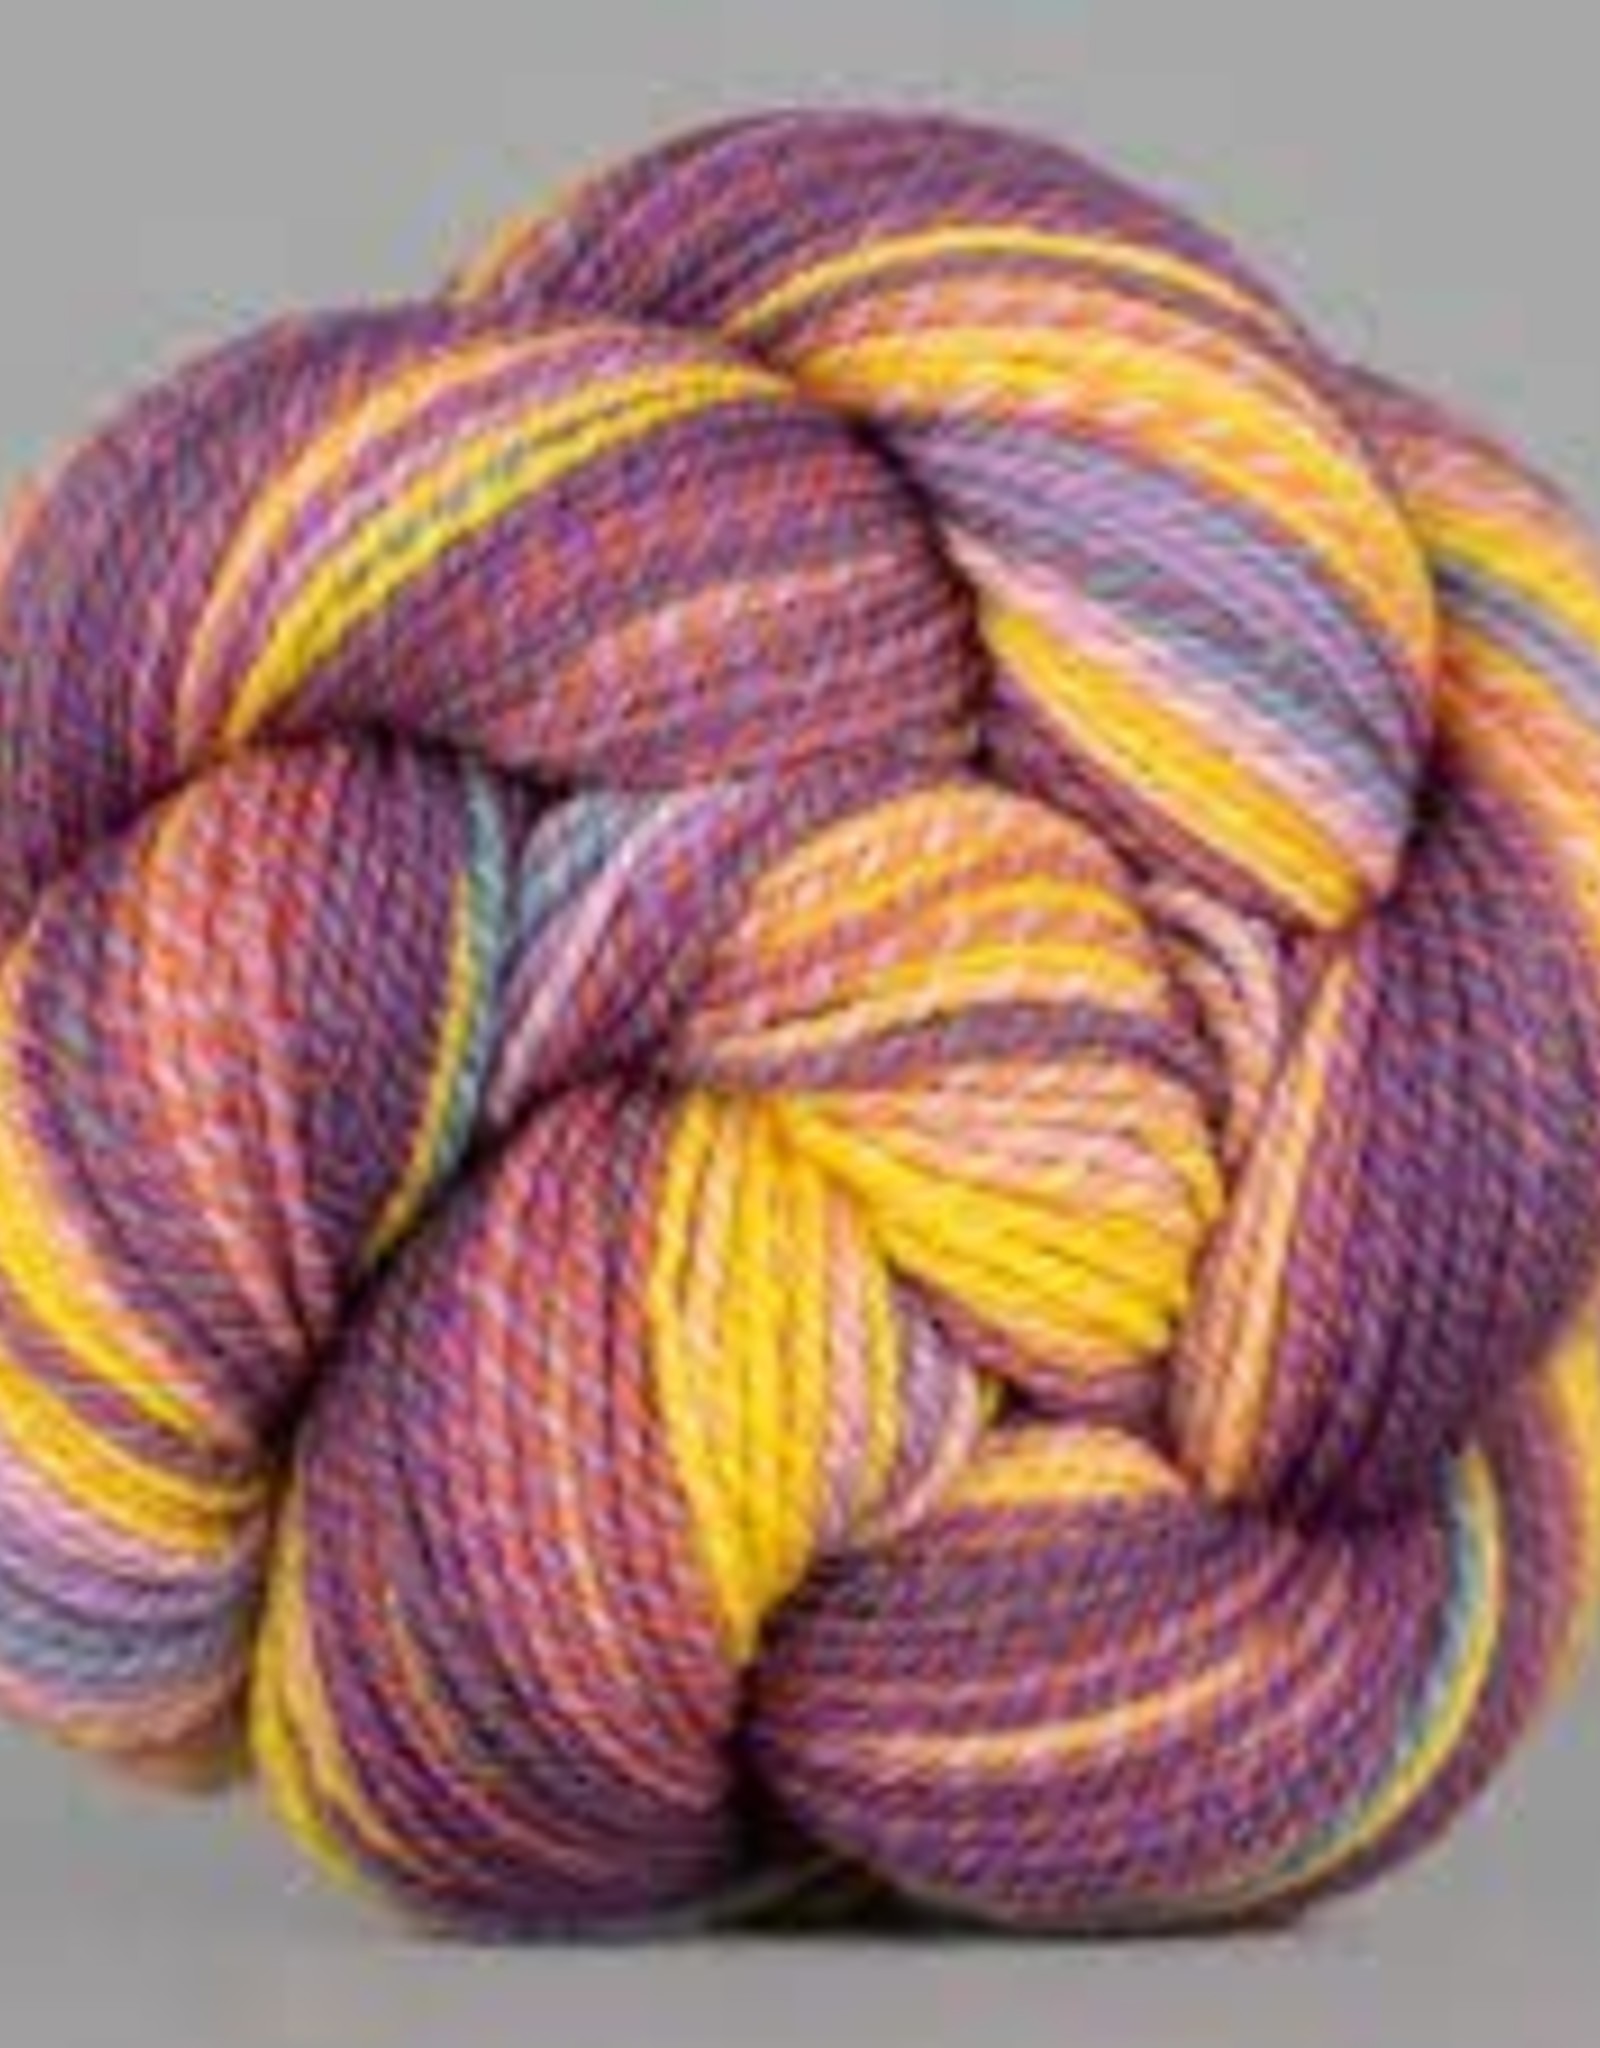 Spincycle Yarns Dyed in the Wool Ranunculus